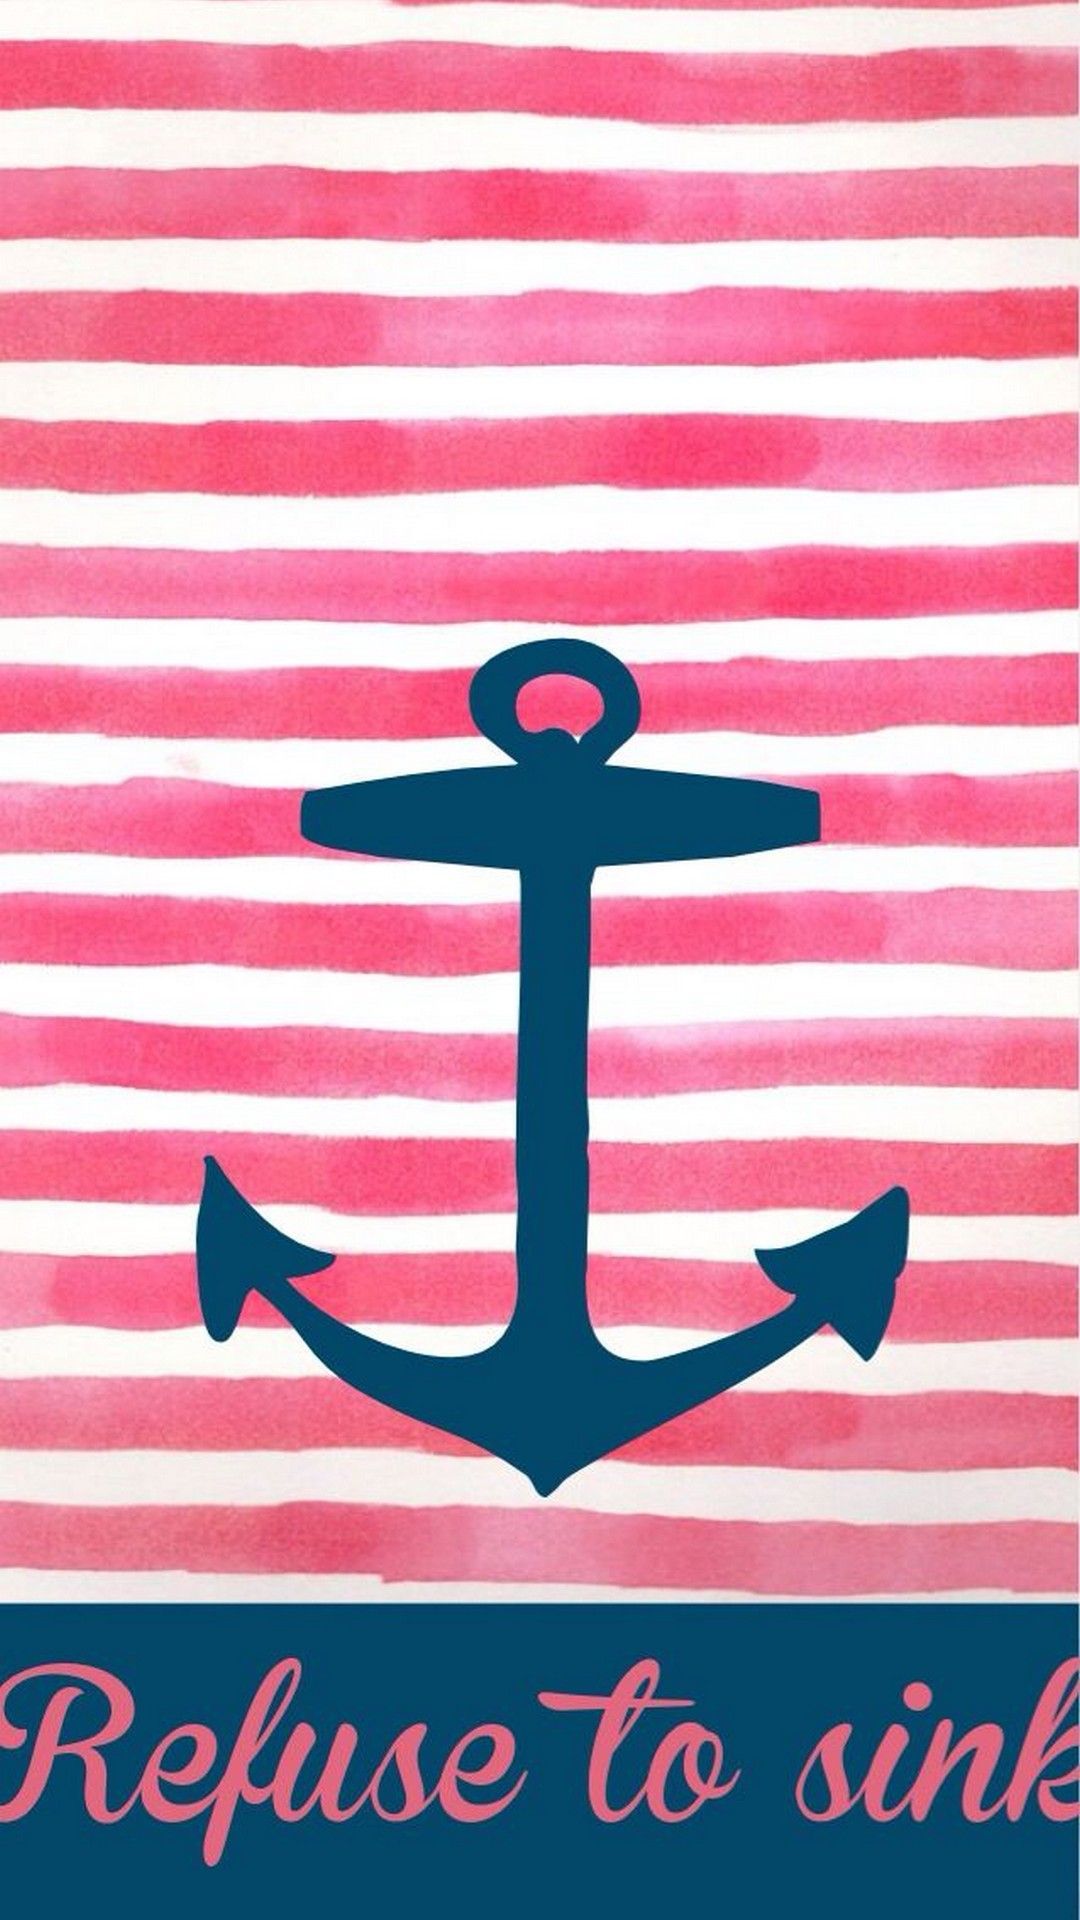 Anchor Iphone Wallpapers